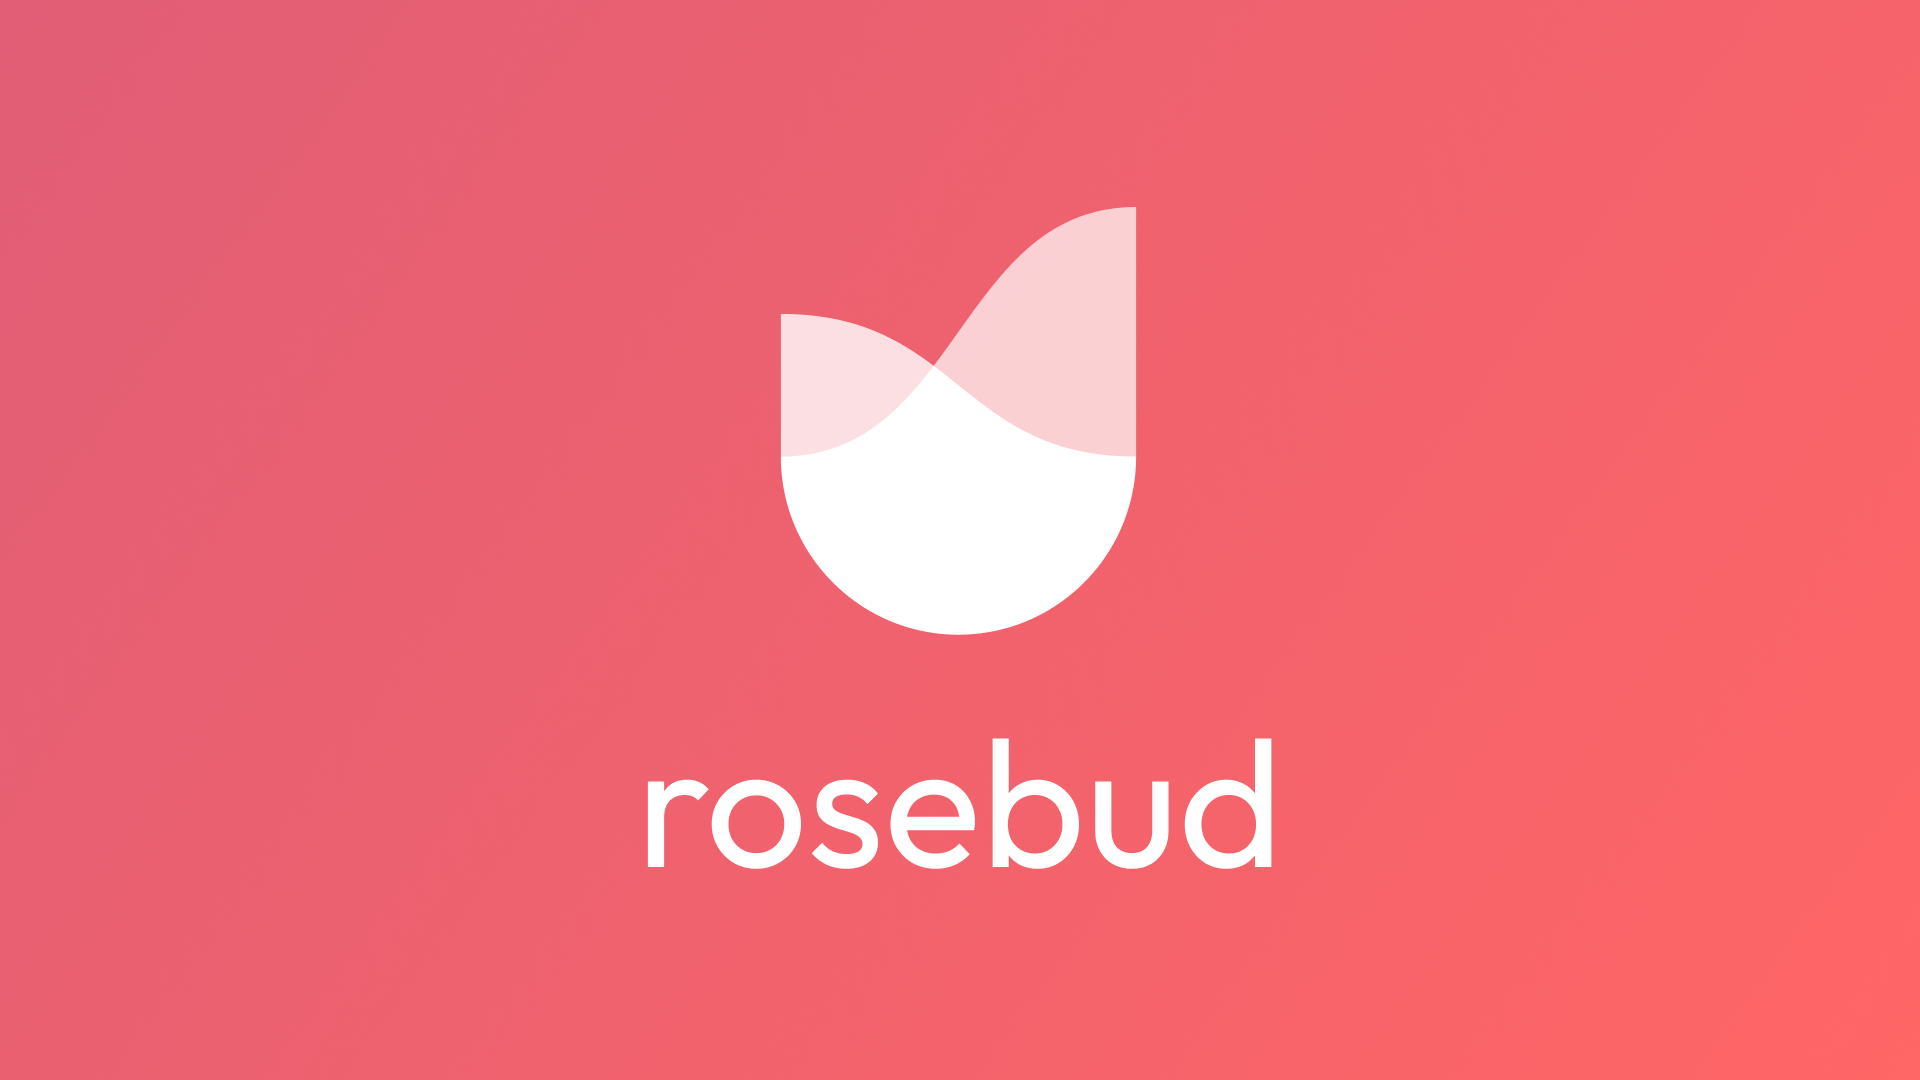 Rosebud - A tool to journal for personal insight and goal achievement